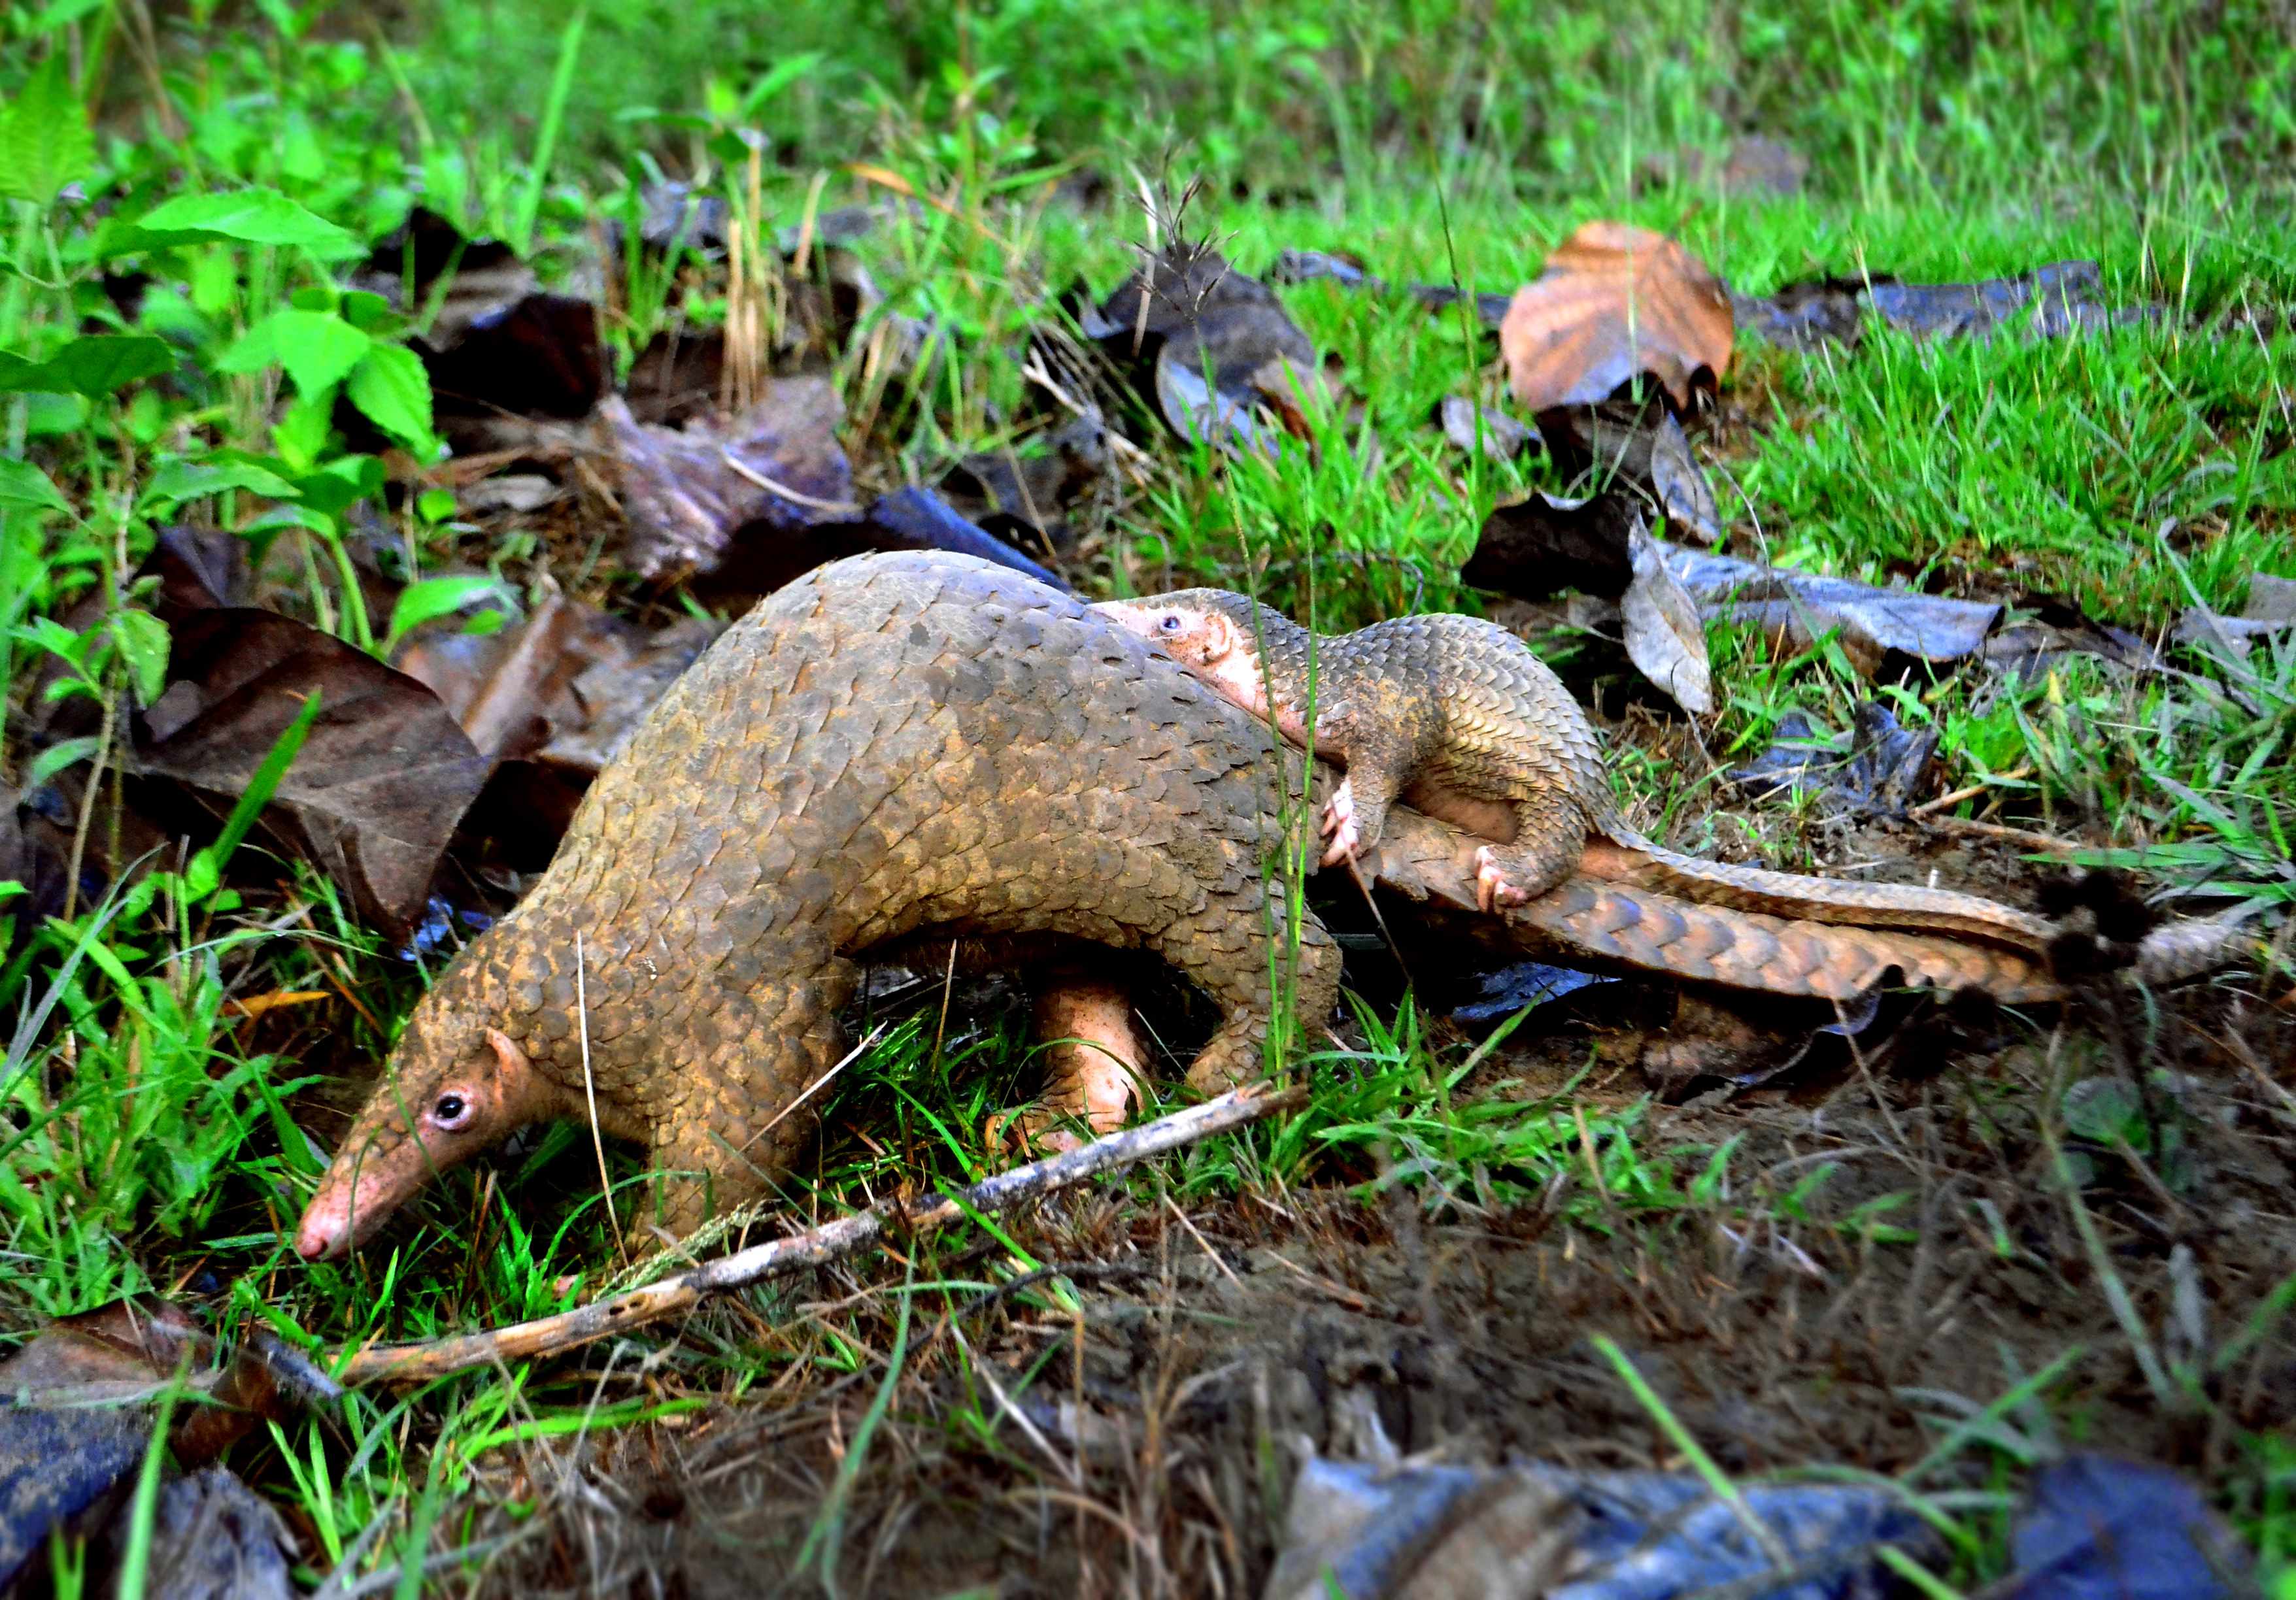 A Philippine pangolin and its young. The animals are hunted intensively, and their skin and scales are used in traditional Chinese medicine. The species is considered critically endangered.